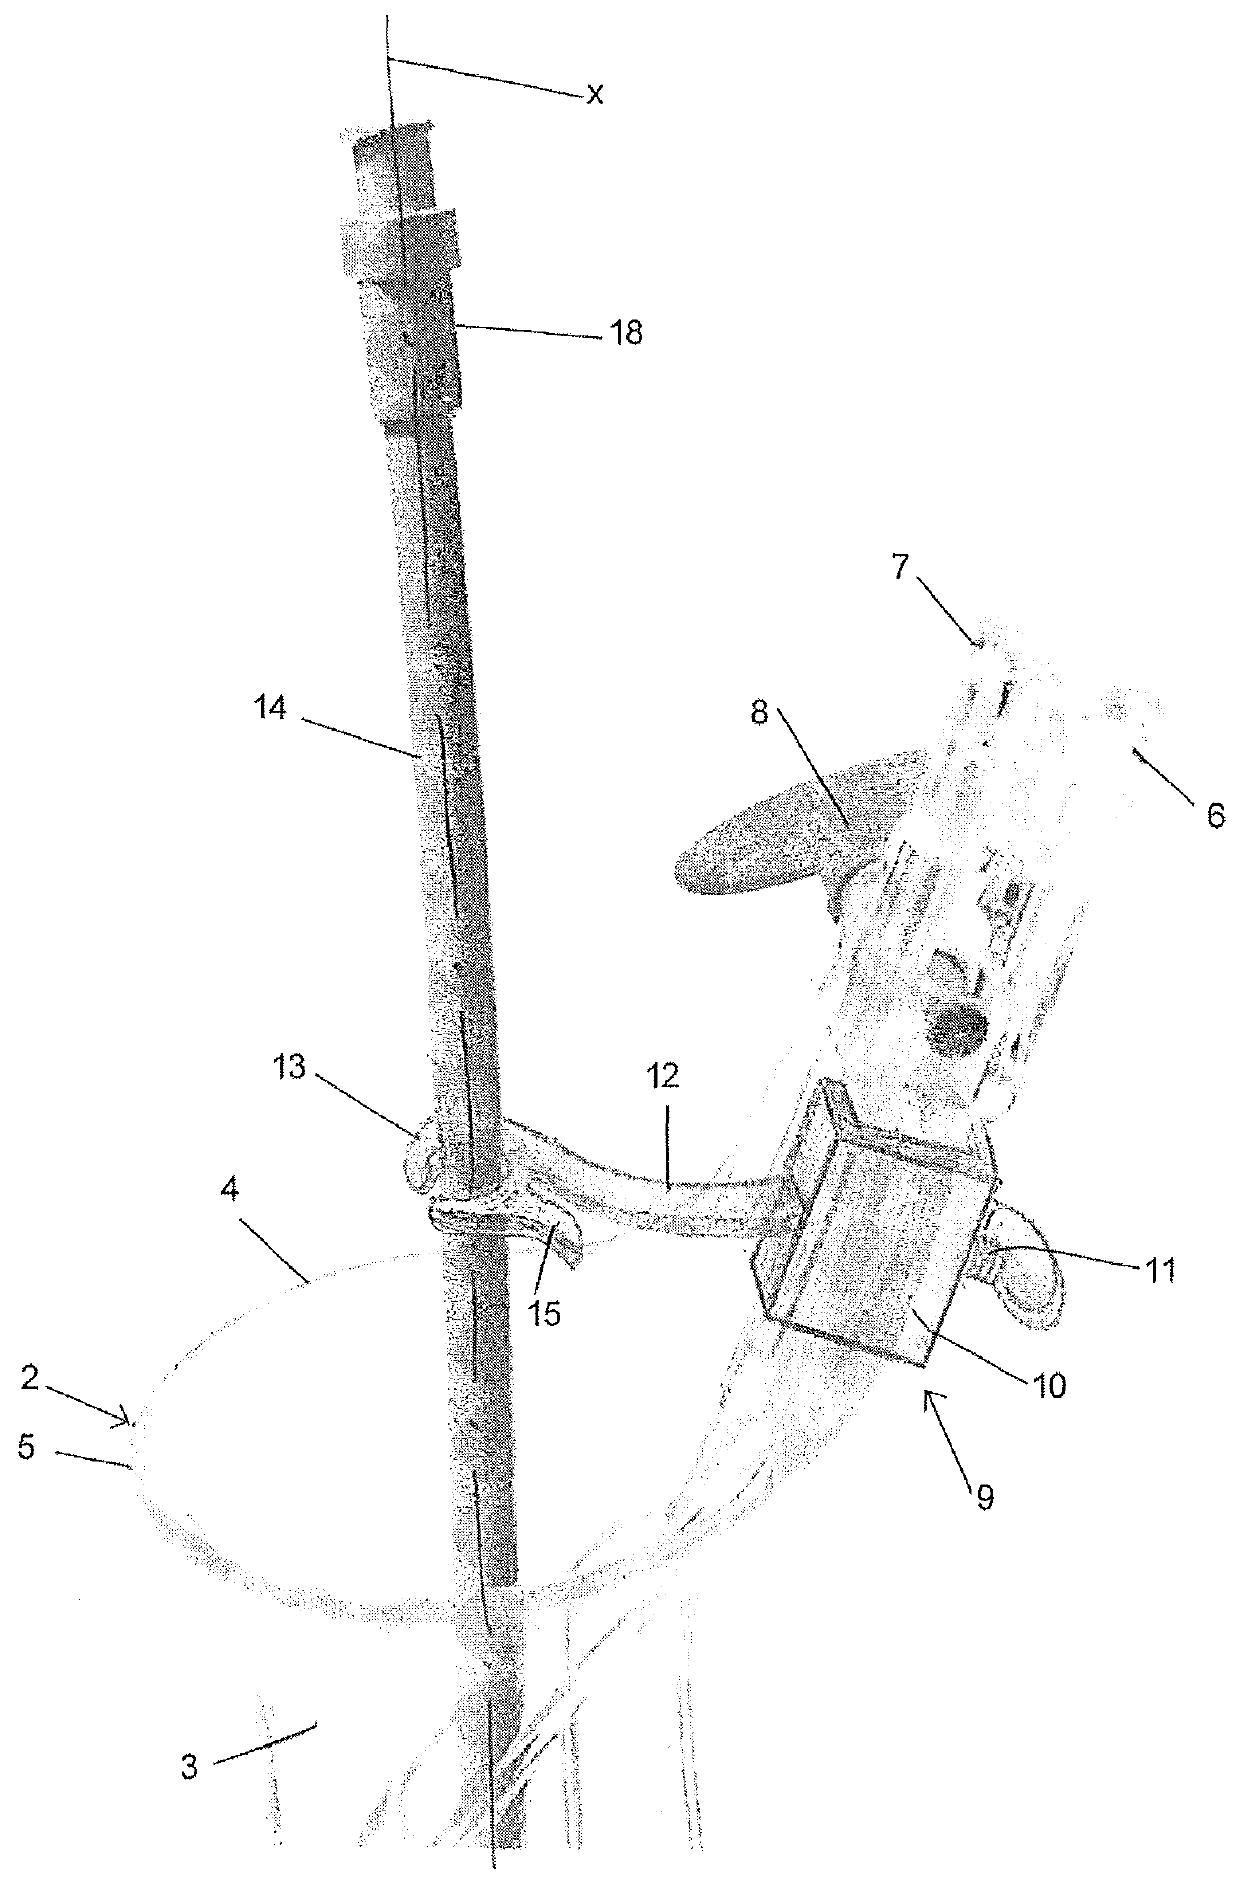 Device for performing examination through the uterine cavity